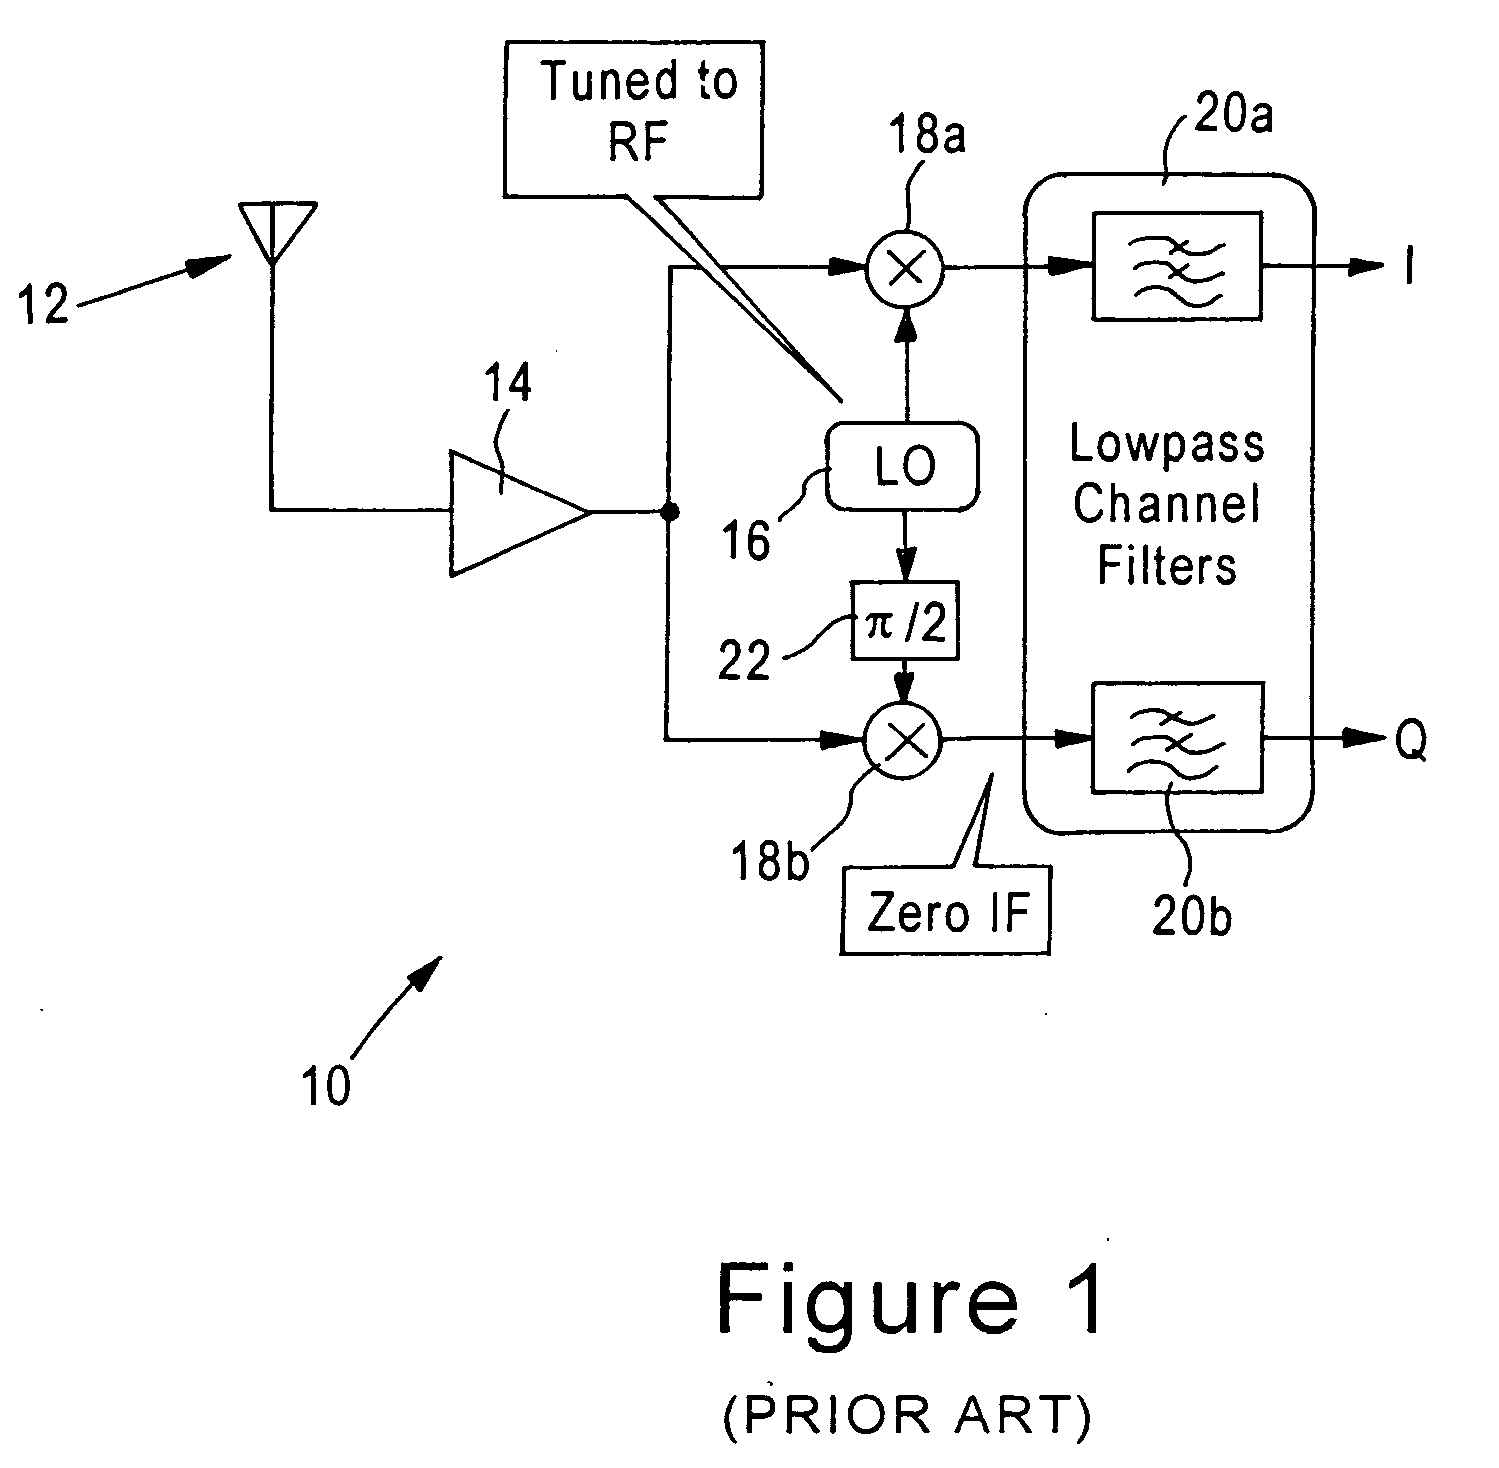 Residual frequency error estimation in an OFDM receiver